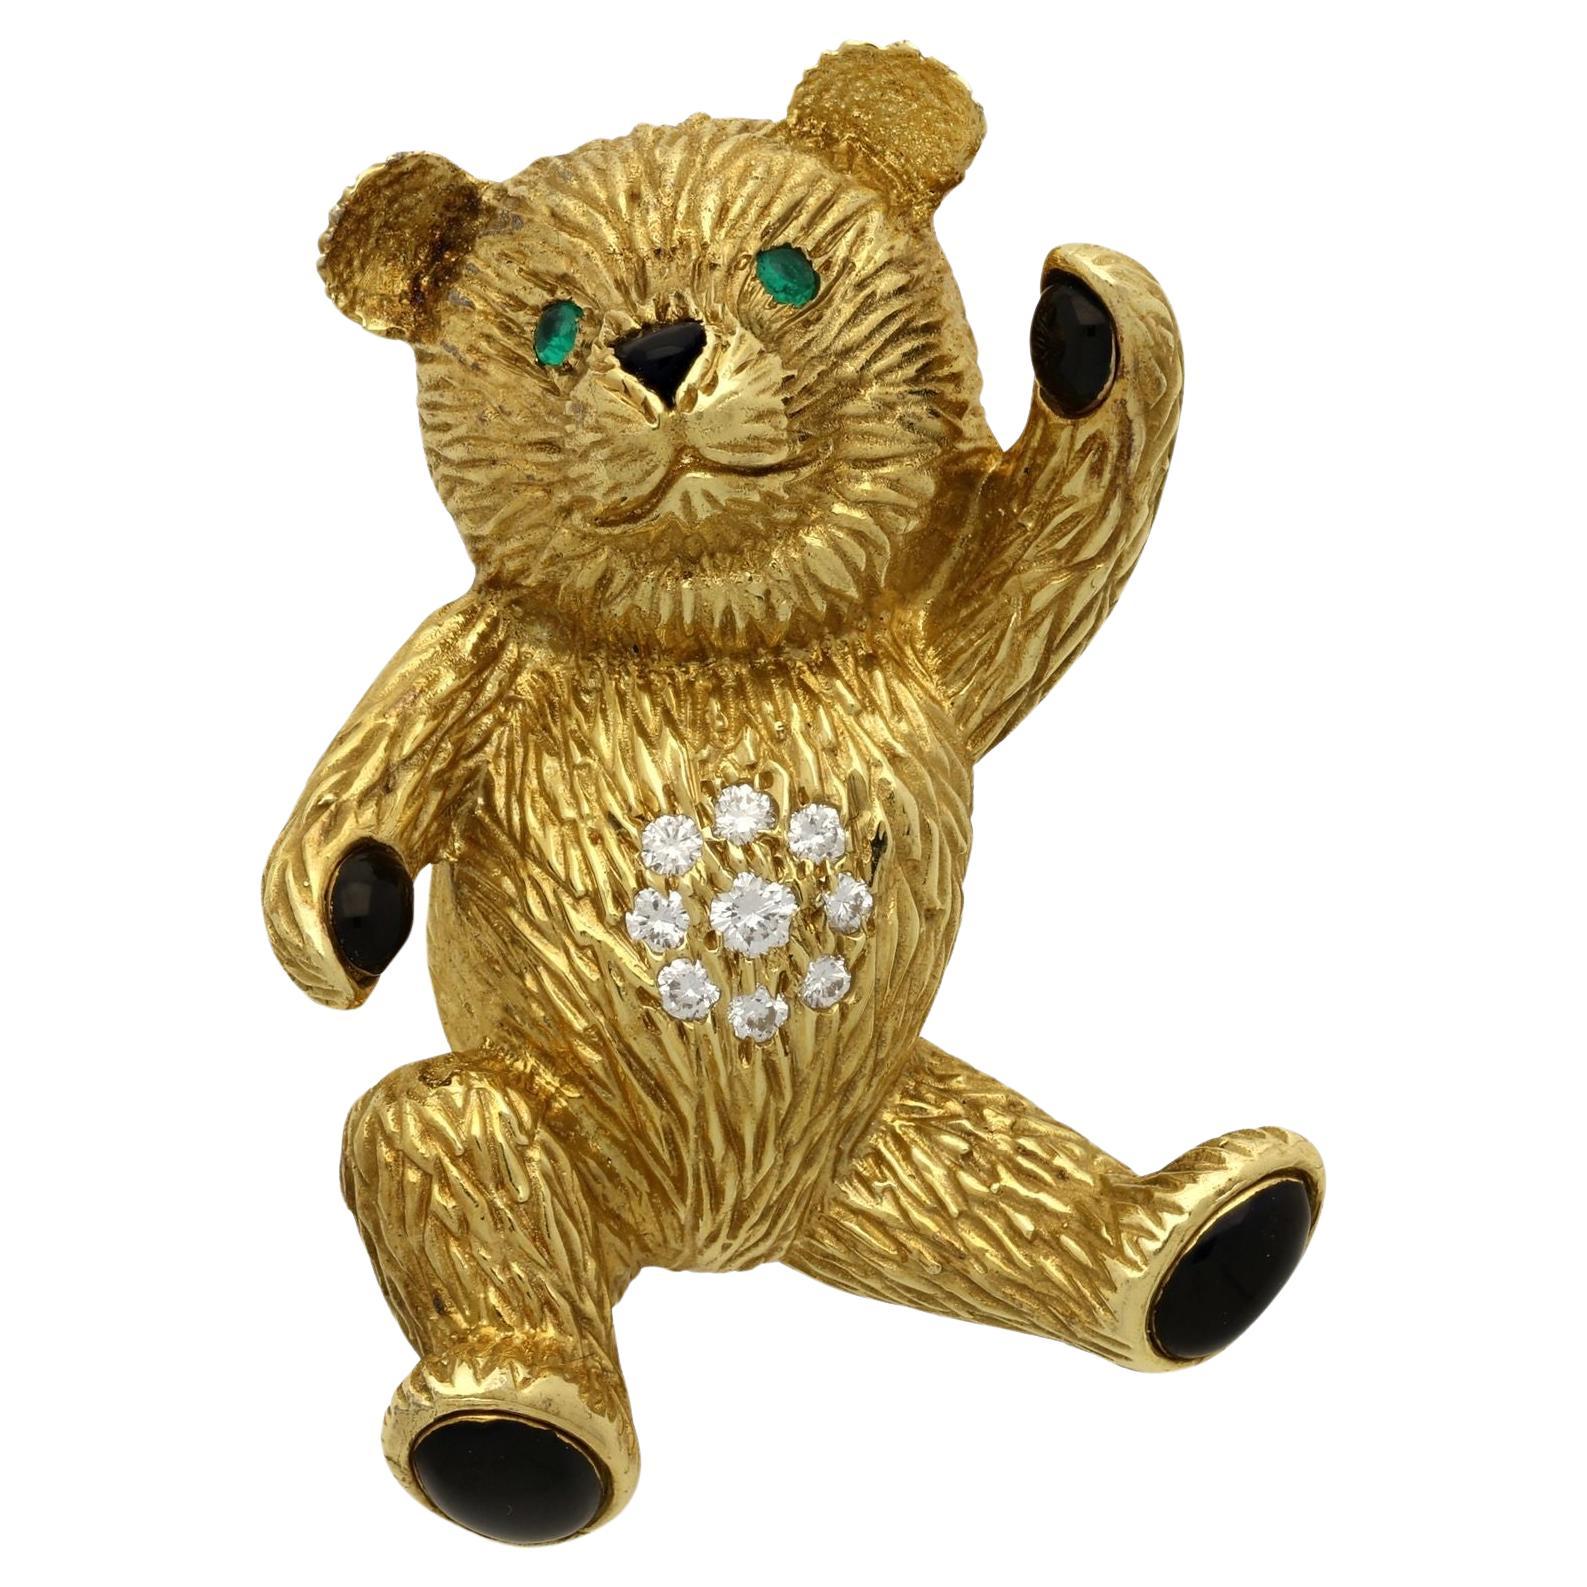 Cartier Vintage 18ct Yellow Gold and Gem-set Teddy Bear Brooch 1987